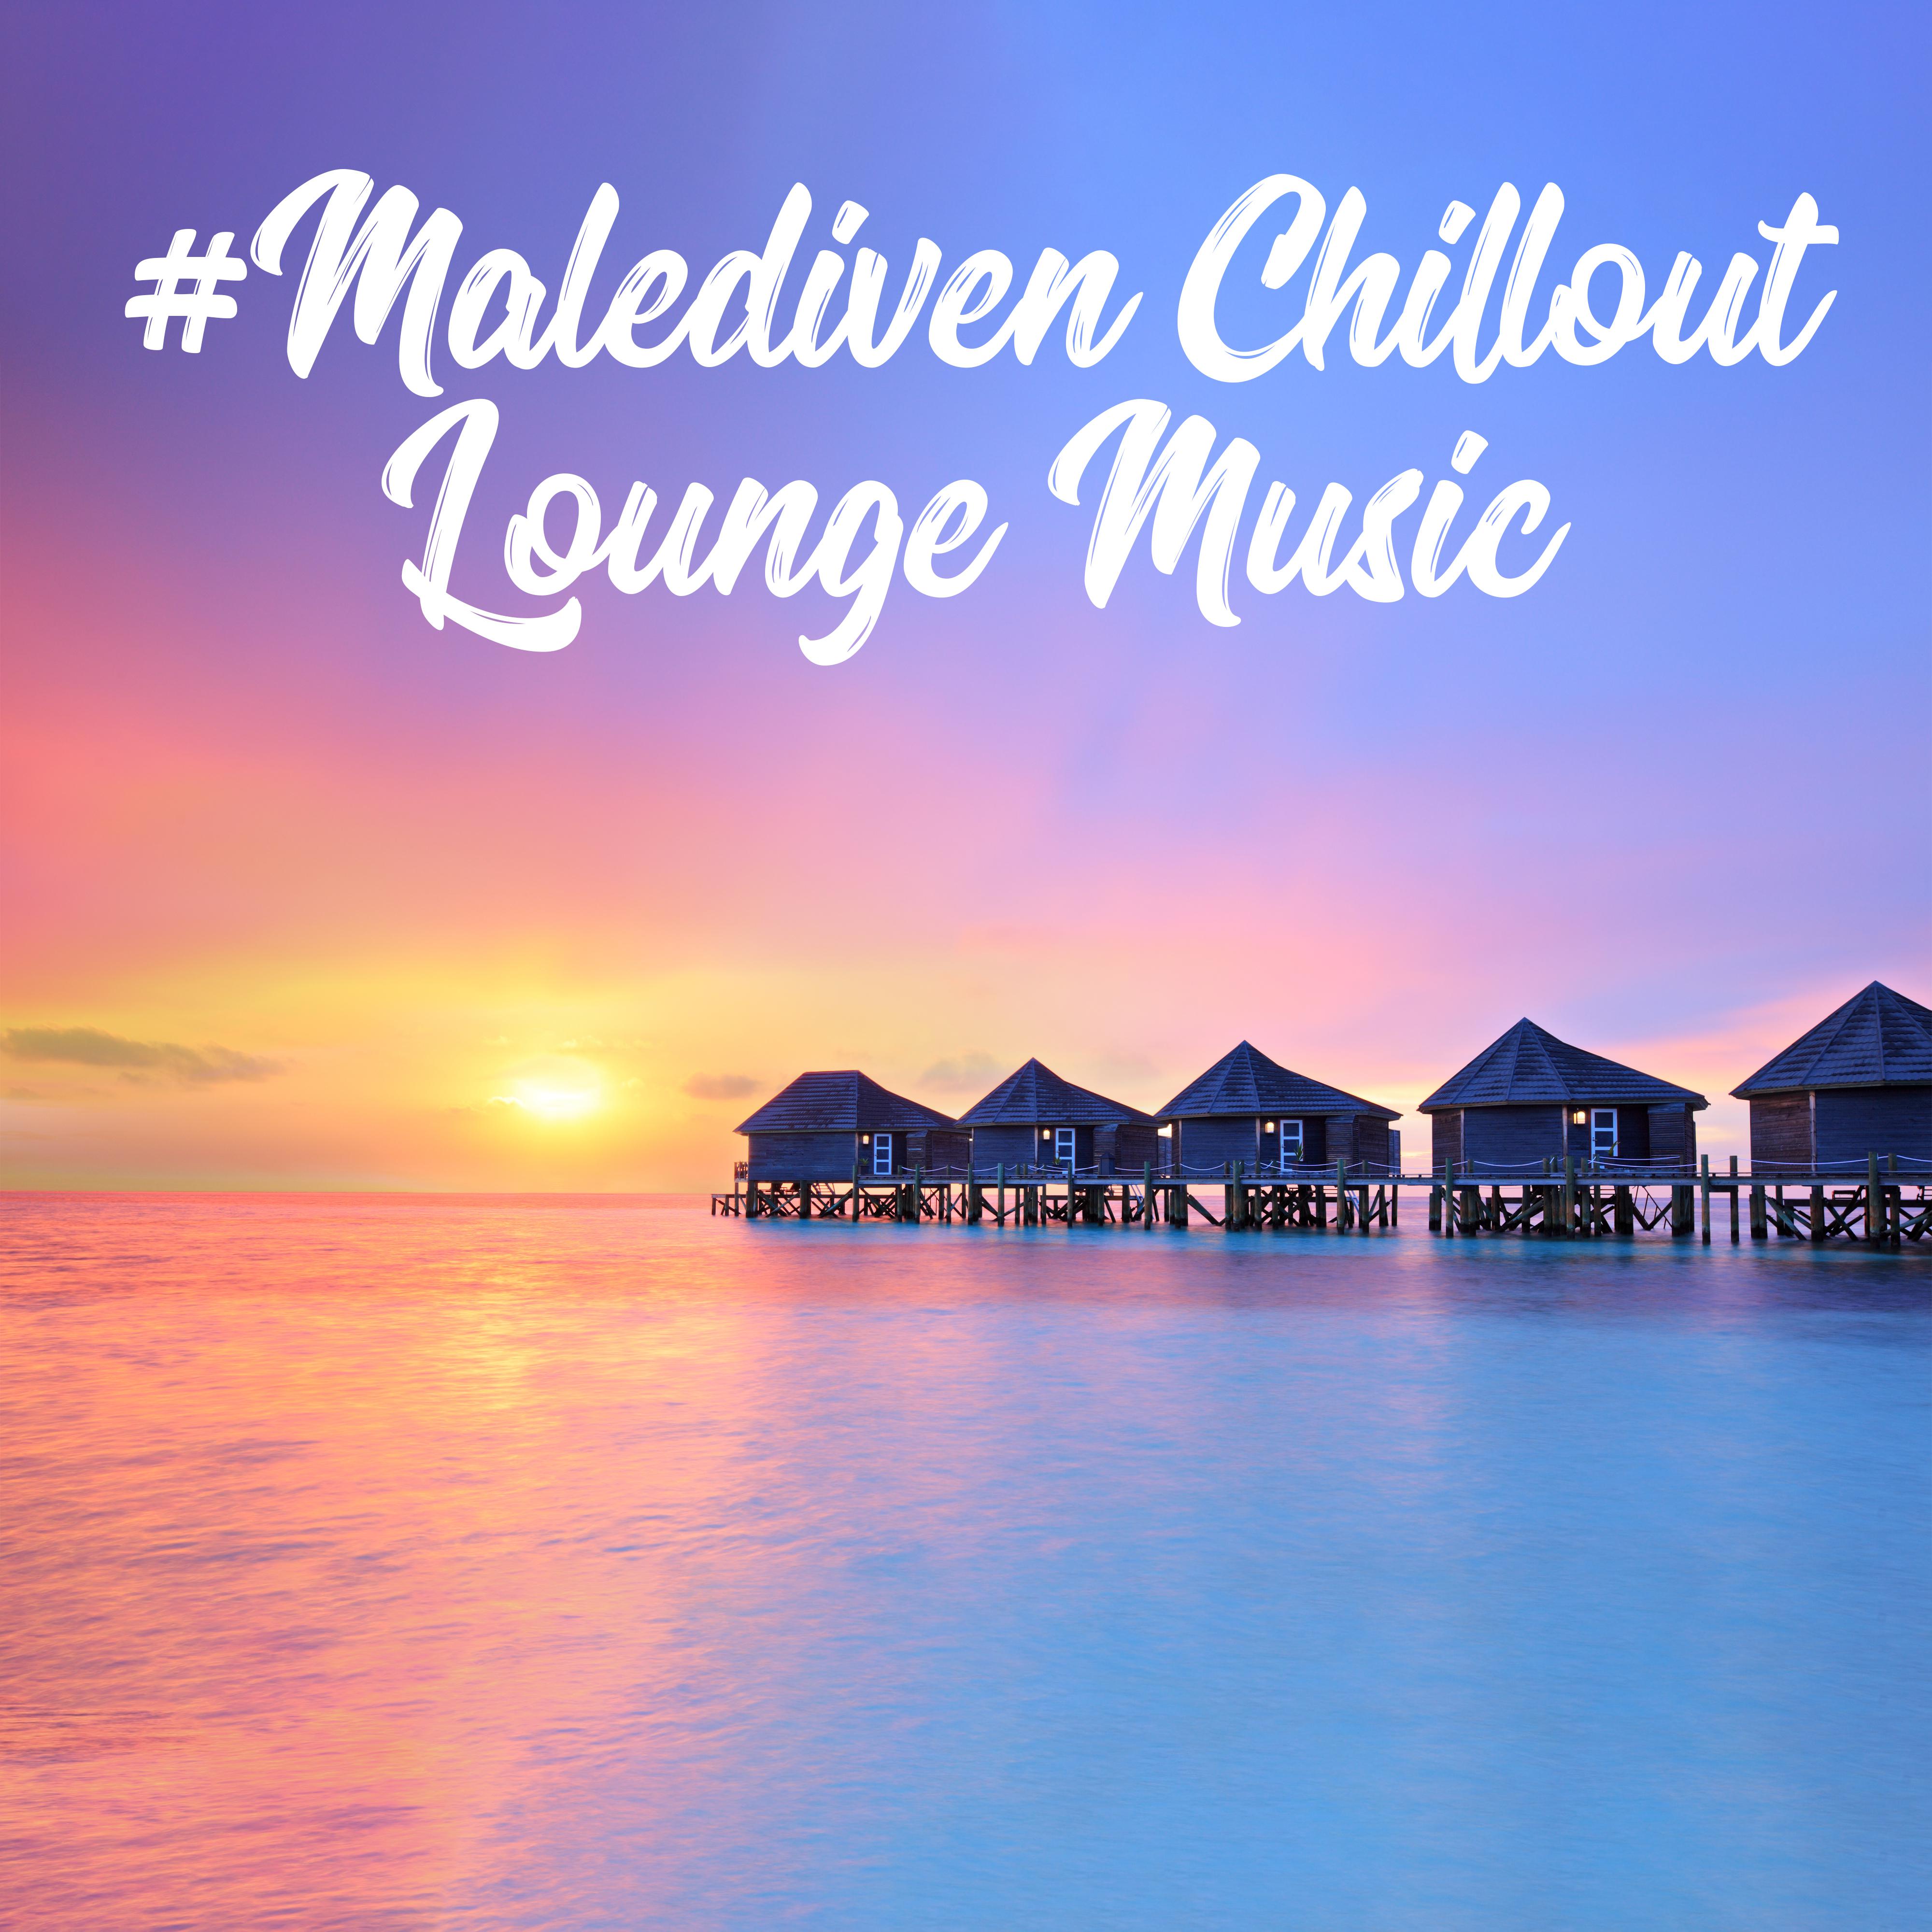 Malediven Chillout Lounge Music  15 Chillout Songs